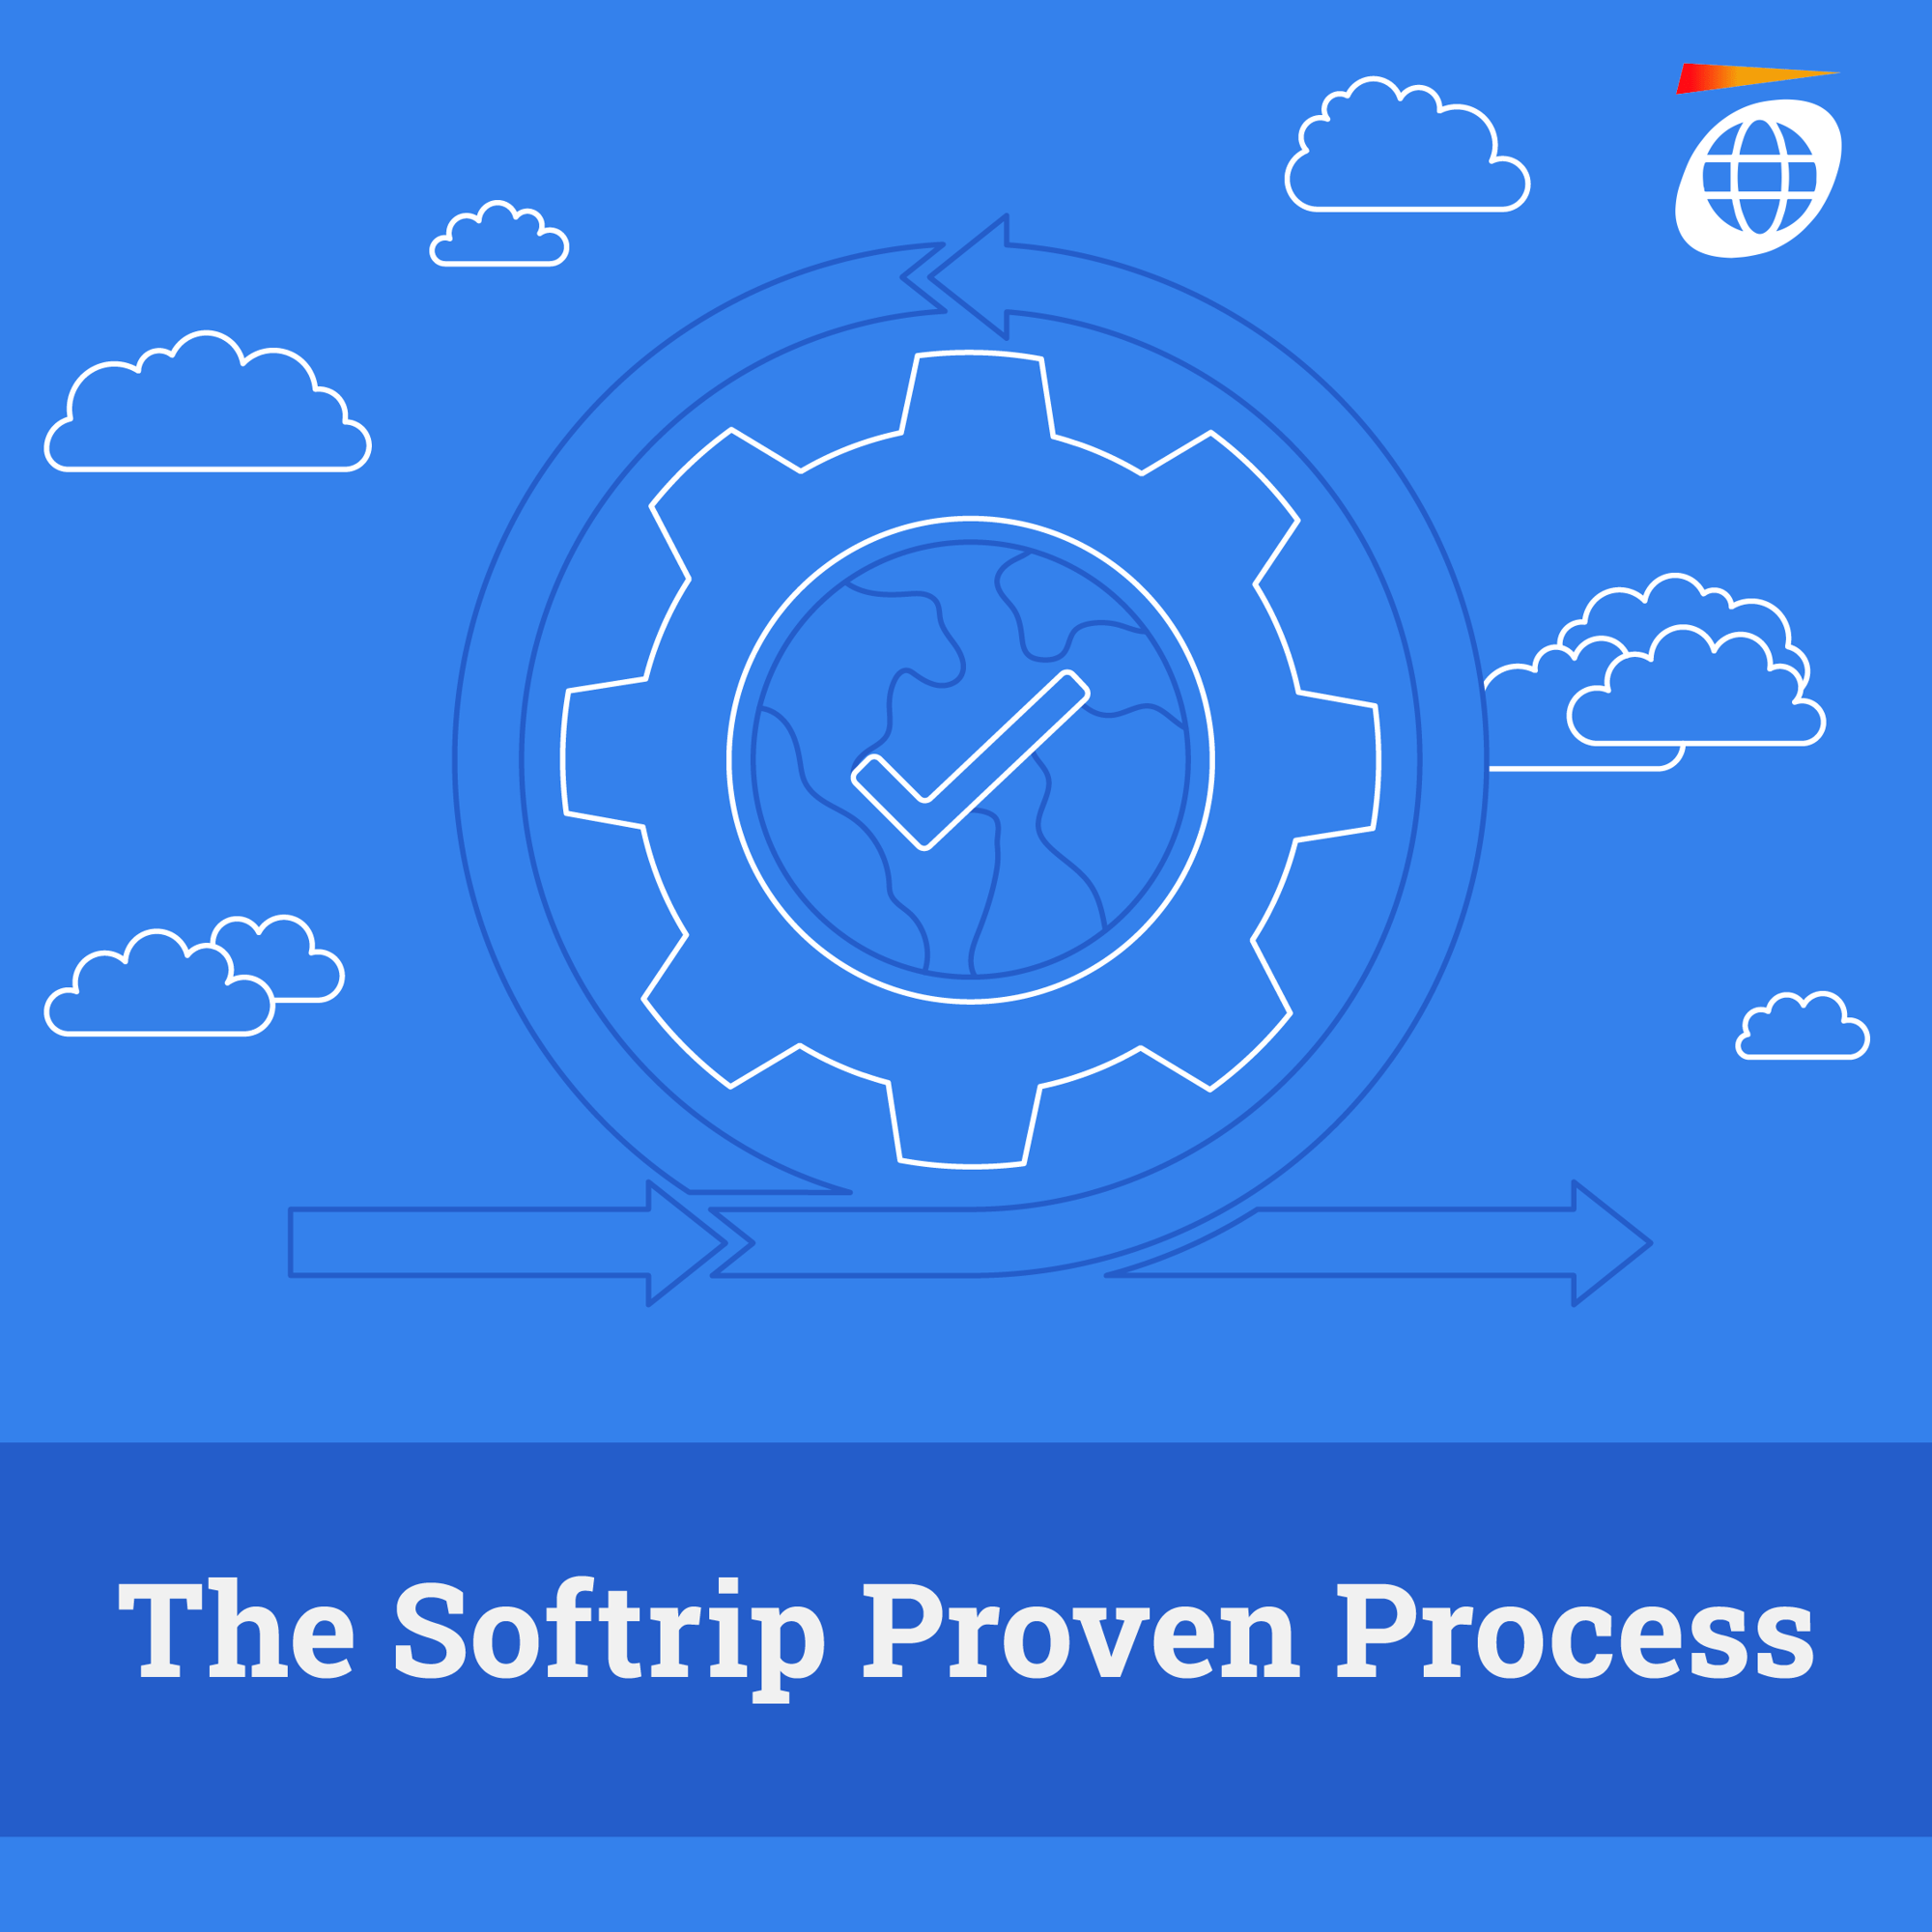 Social_The Softrip Proven Process